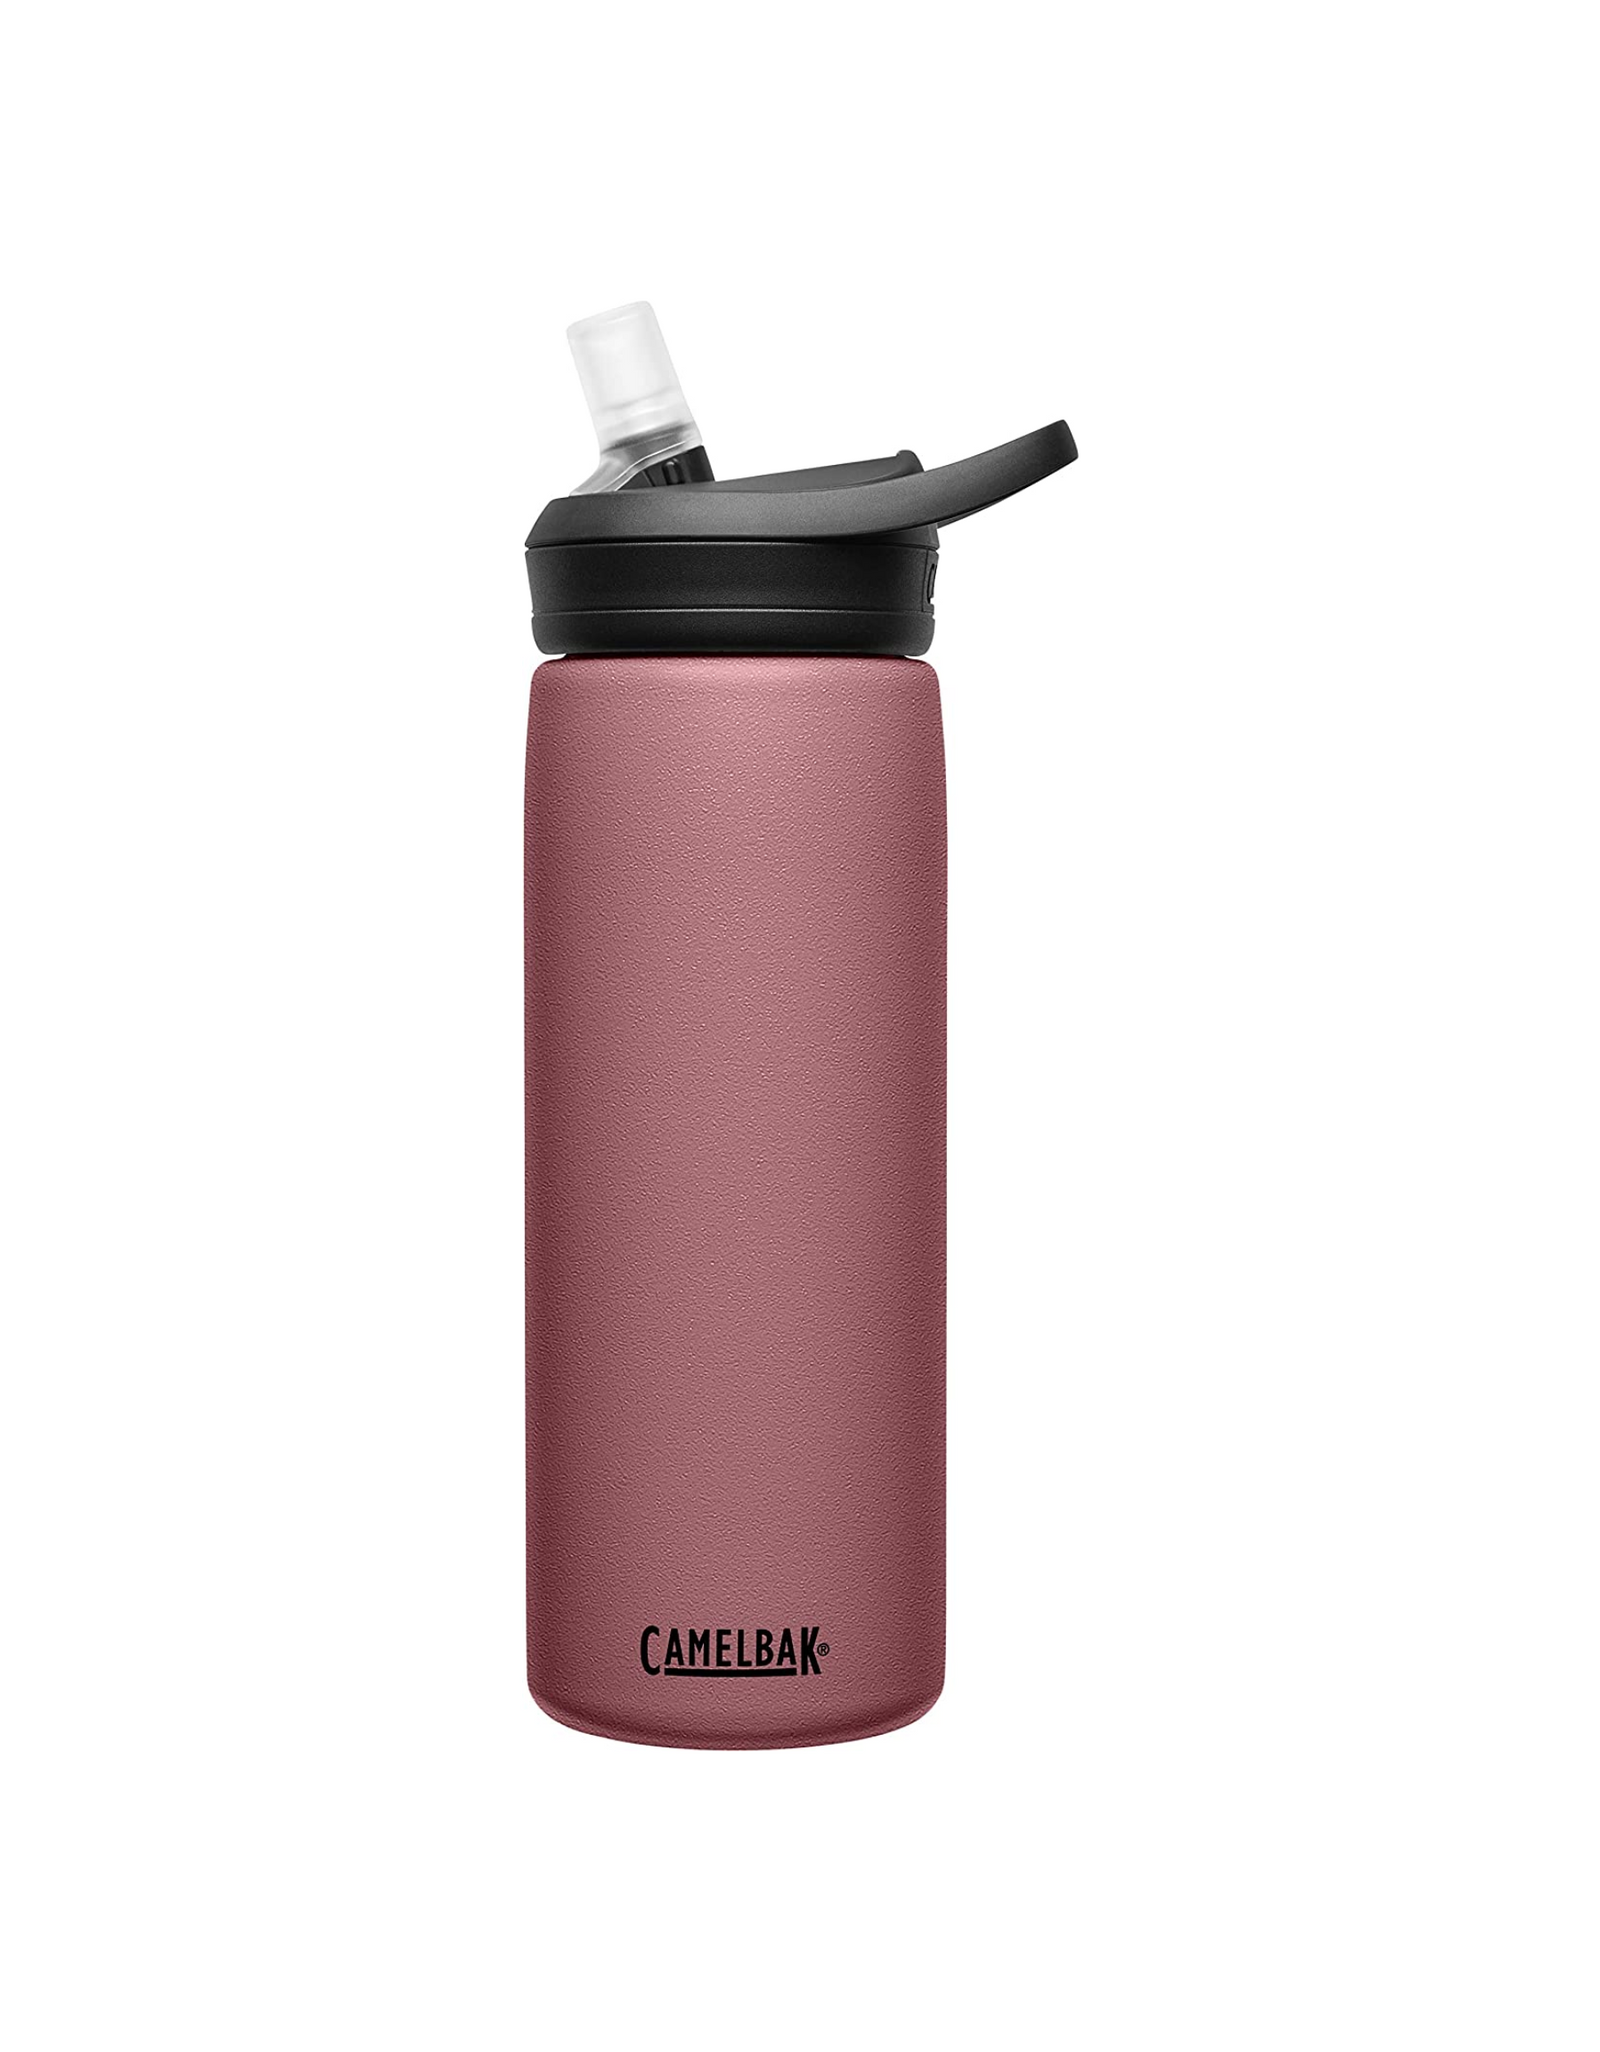 CamelBak eddy+ Water Bottle with Straw, Insulated Stainless Steel, 20 oz, Terracotta Rose